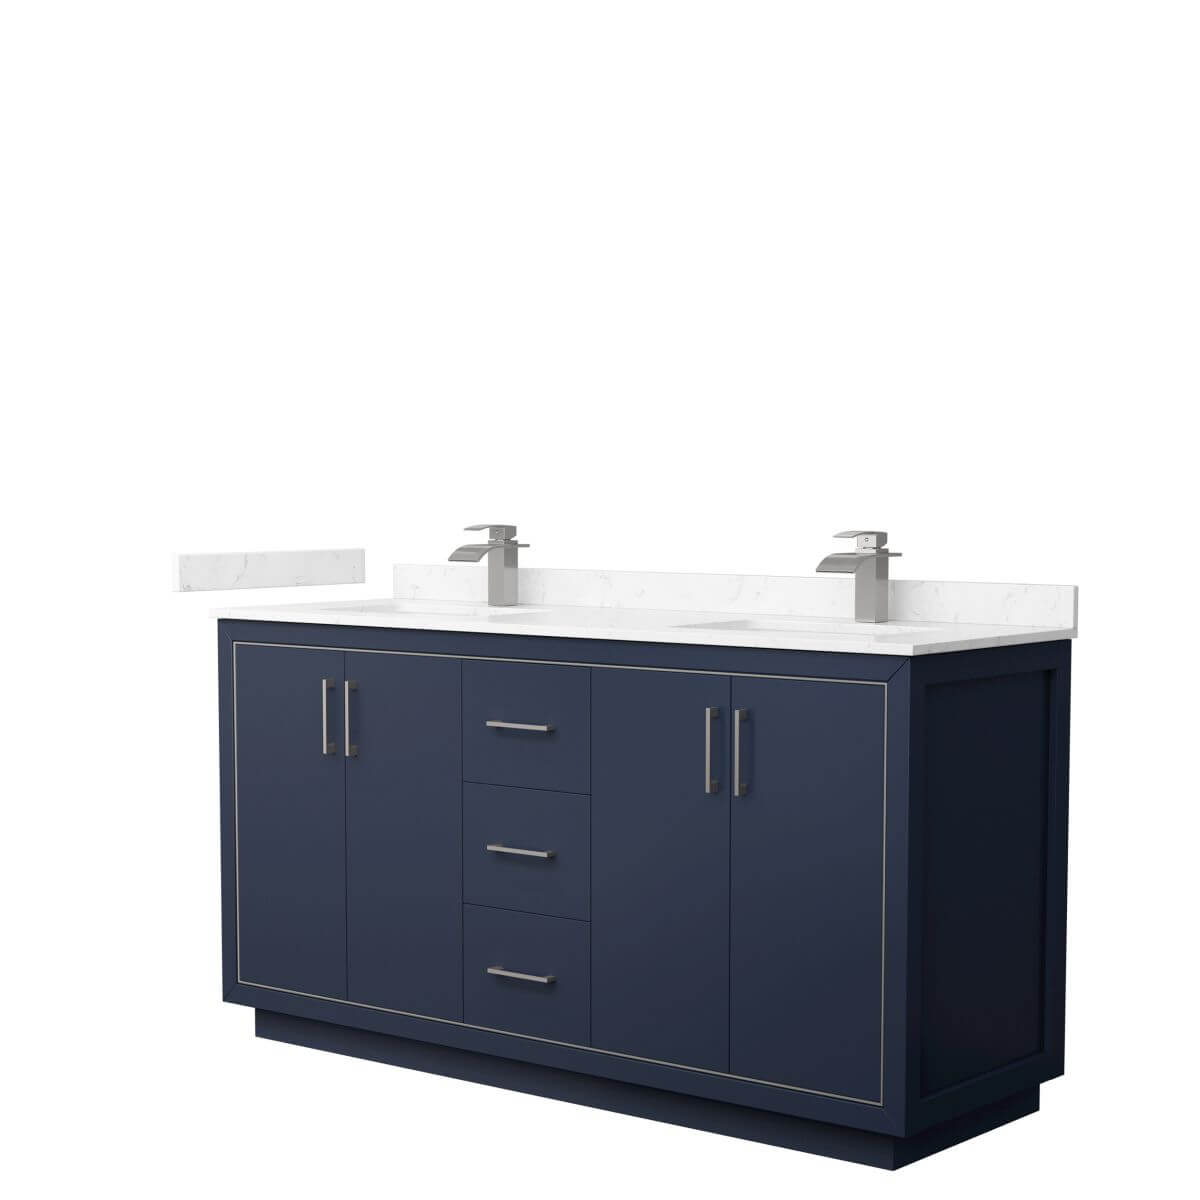 Wyndham Collection WCF111166DBNC2UNSMXX Icon 66 inch Double Bathroom Vanity in Dark Blue with Carrara Cultured Marble Countertop, Undermount Square Sinks and Brushed Nickel Trim